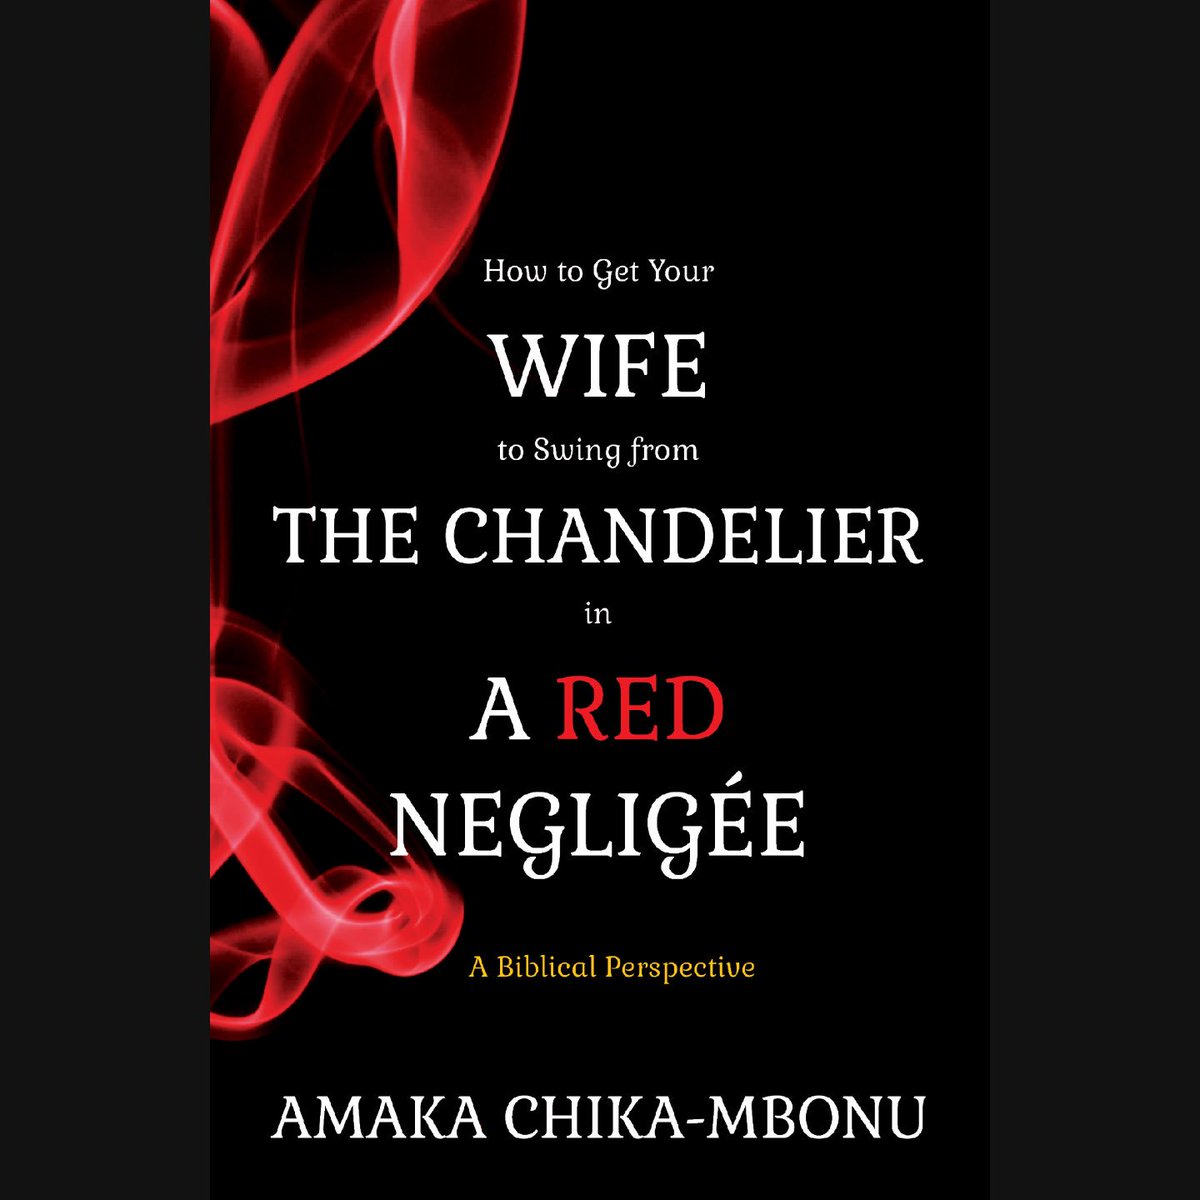 ‘How to Get Your Wife to Swing from the Chandelier in a Red Negligee’ by Amaka Chika Mbonu